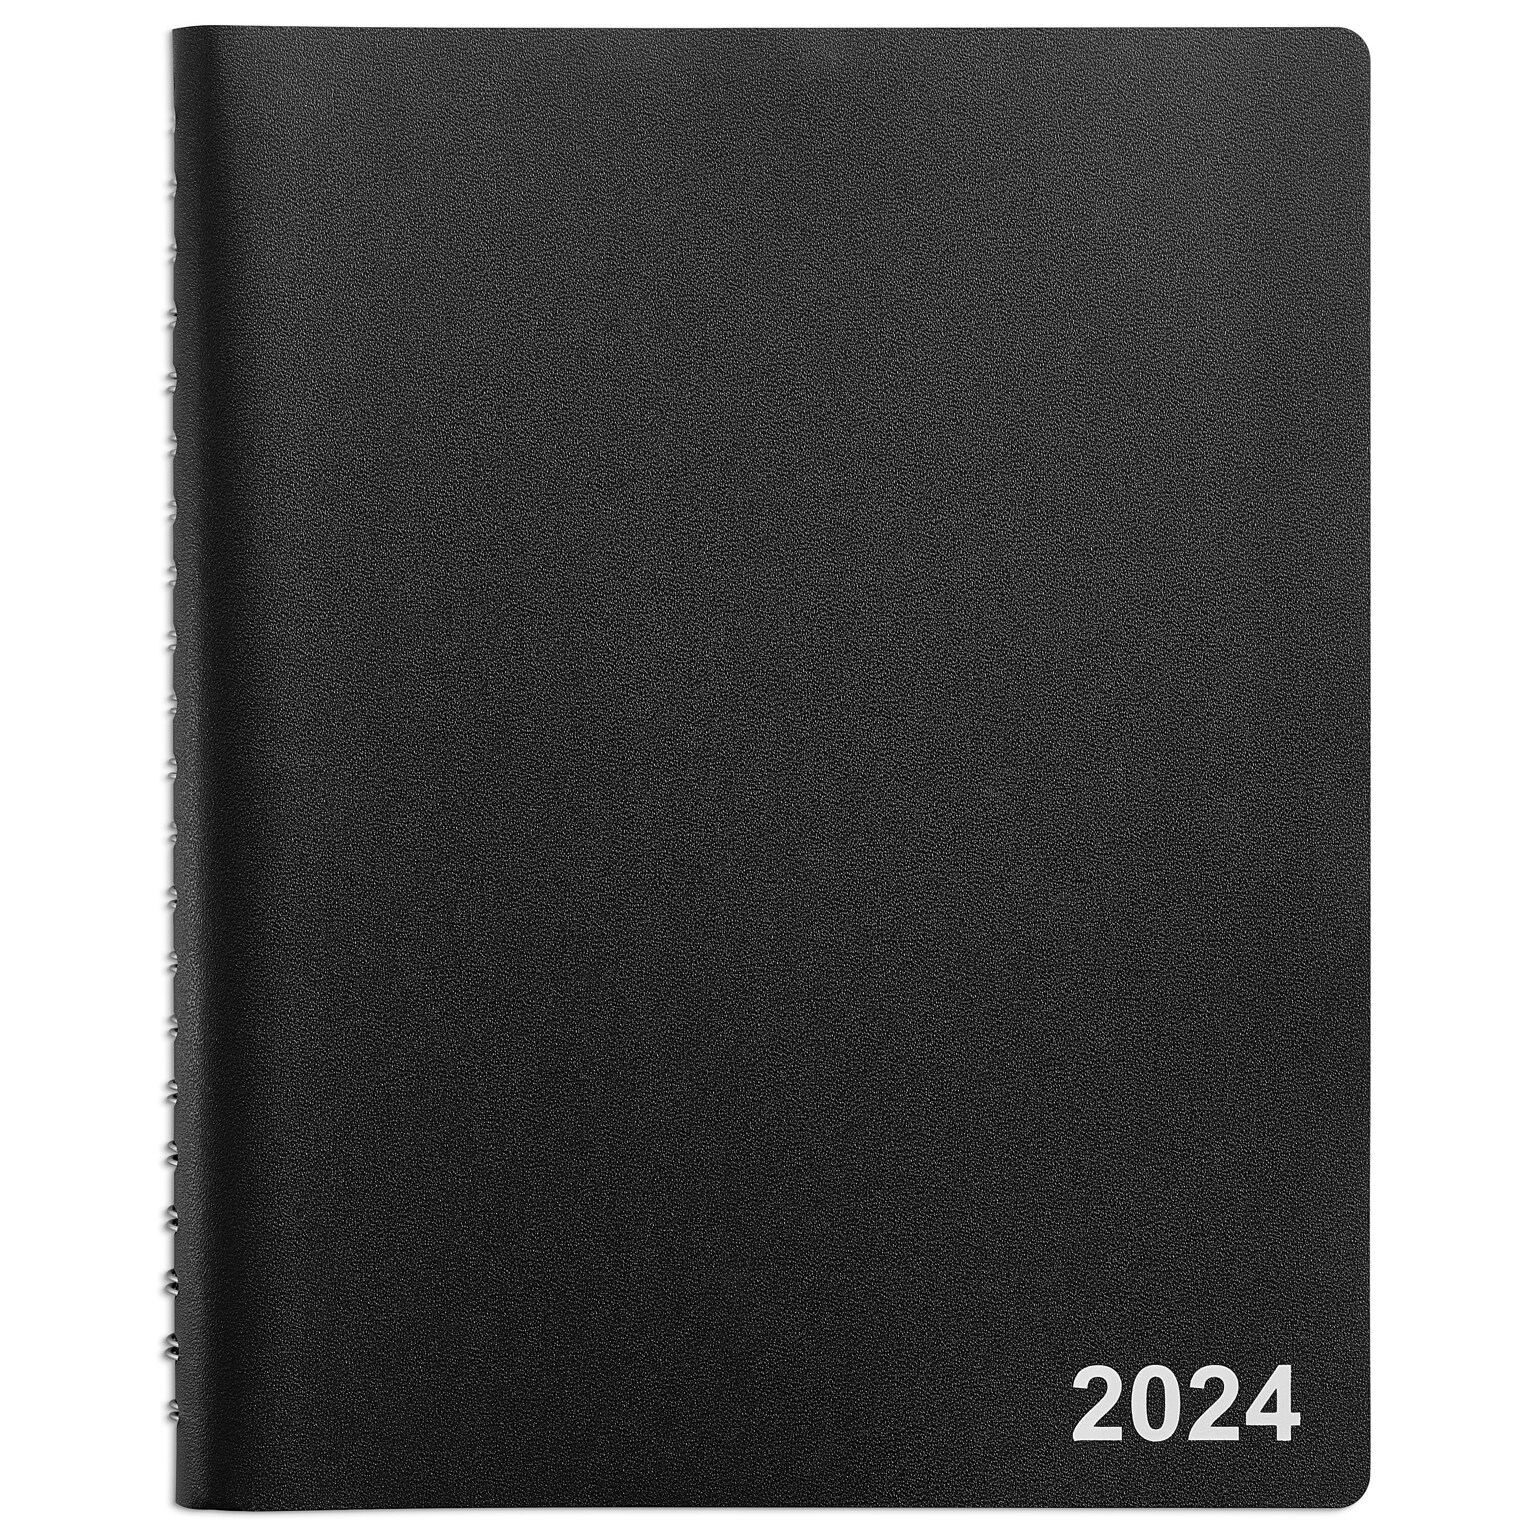 2024 Staples 8 x 11 Four-Person Daily Appointment Book, Black (ST58479-24)